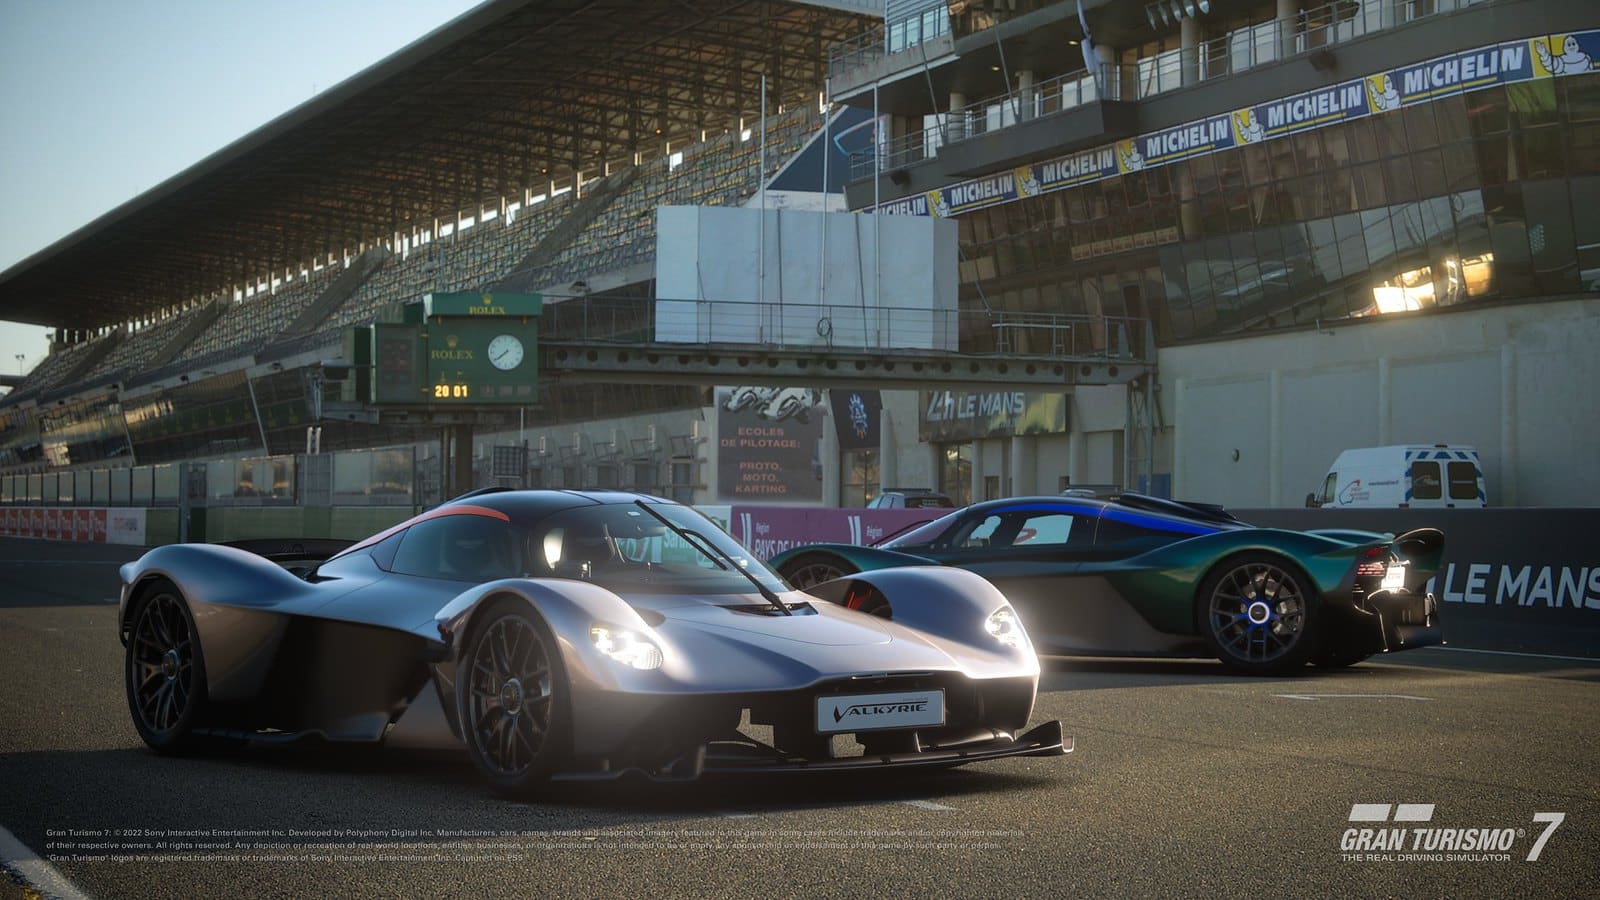 Gran Turismo 7's new update is now live, adding three new cars